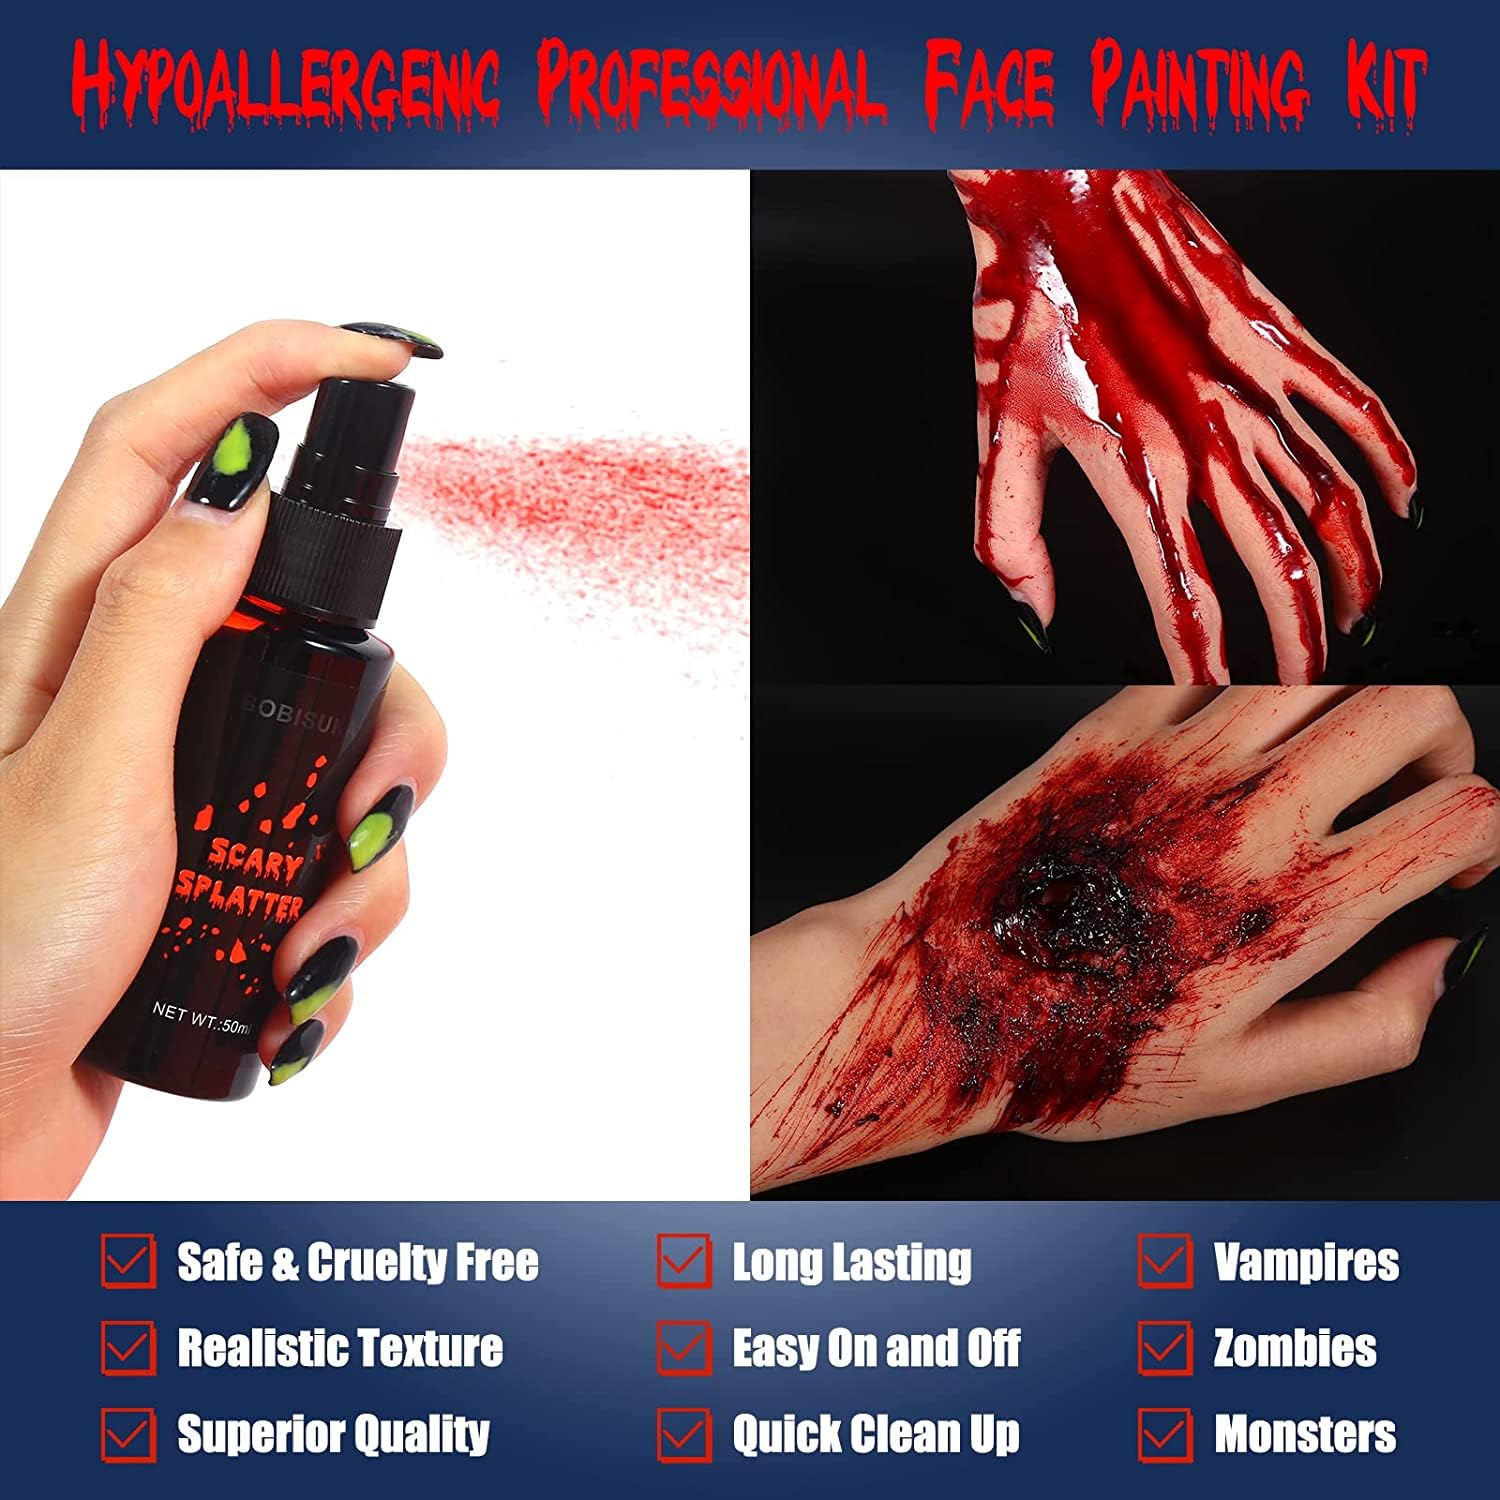 BOBISUKA 3PCS Halloween Fake Blood Makeup Kit - Coagulated Blood 1.41oz + Fake Blood Spray 1.76oz + Dripping Blood 1.76oz, Realistic Washable Special Effects SFX Makeup Set, for Zombie Vampire Monster Cosplay Mouth Clothes Dress Up